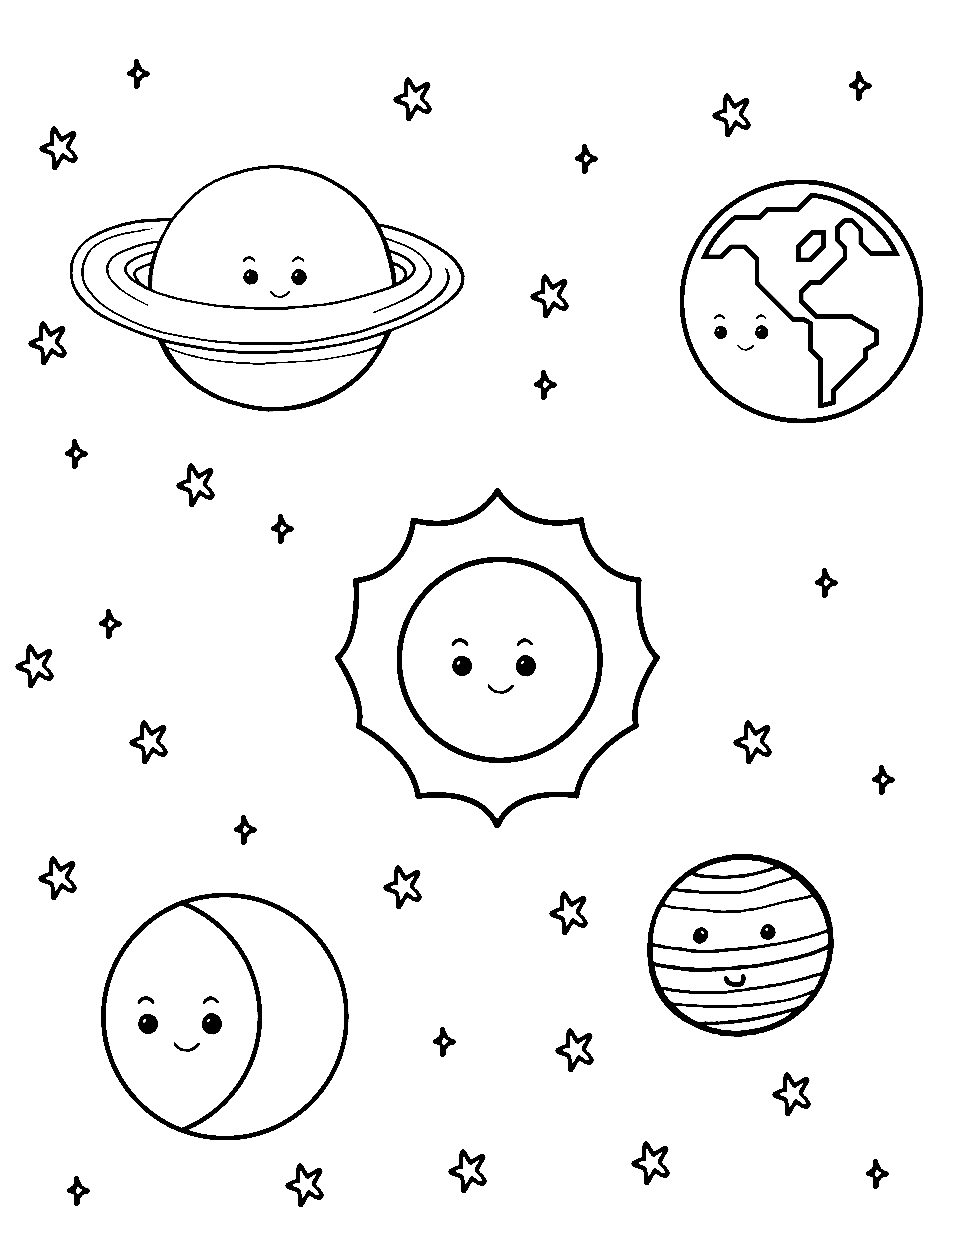 Solar System's Simple Story Coloring Page - Basic representation of our solar system with the sun and planets.